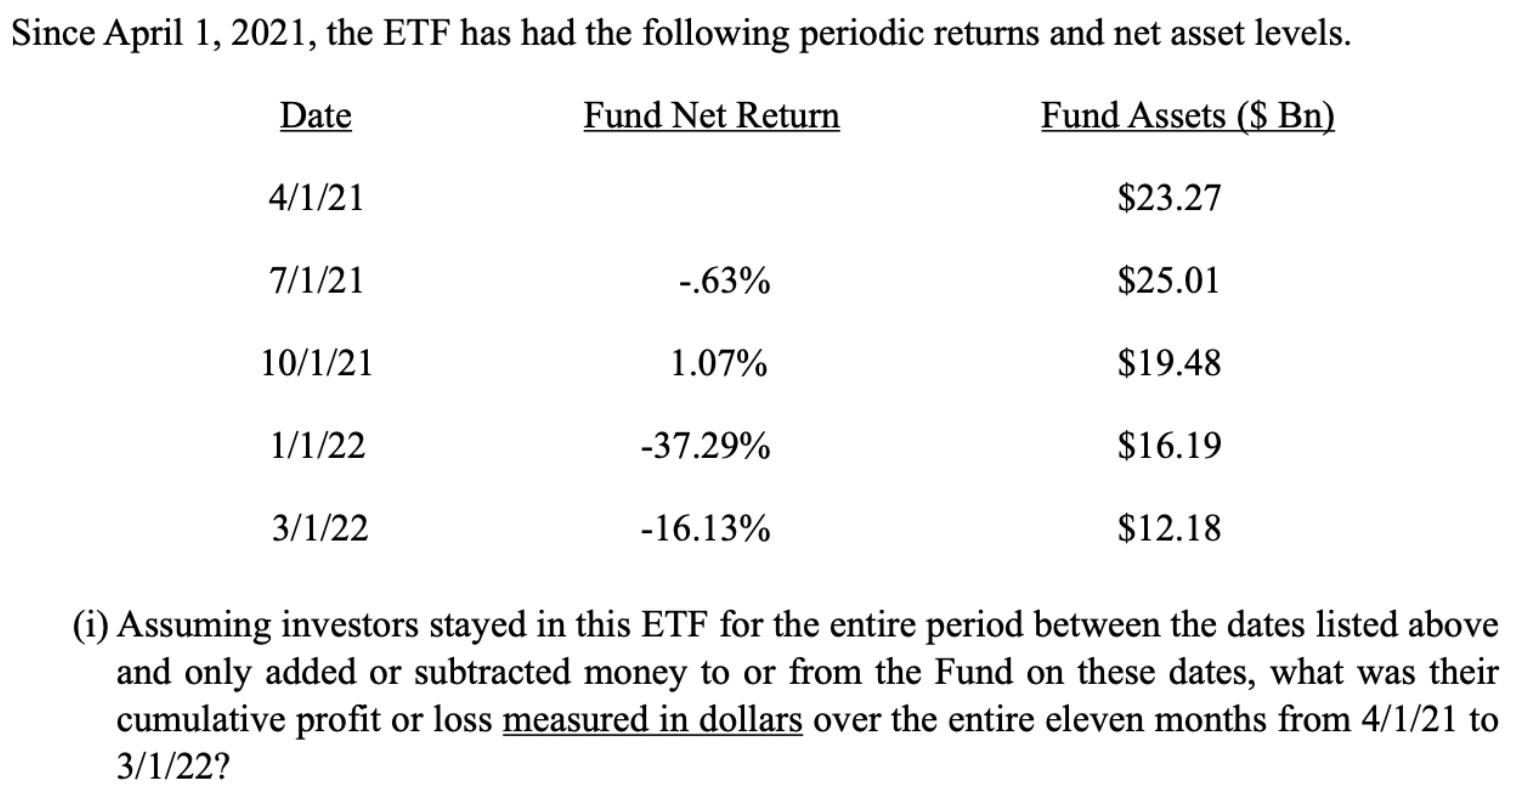 Since April 1, 2021, the ETF has had the following periodic returns and net asset levels. Fund Net Return